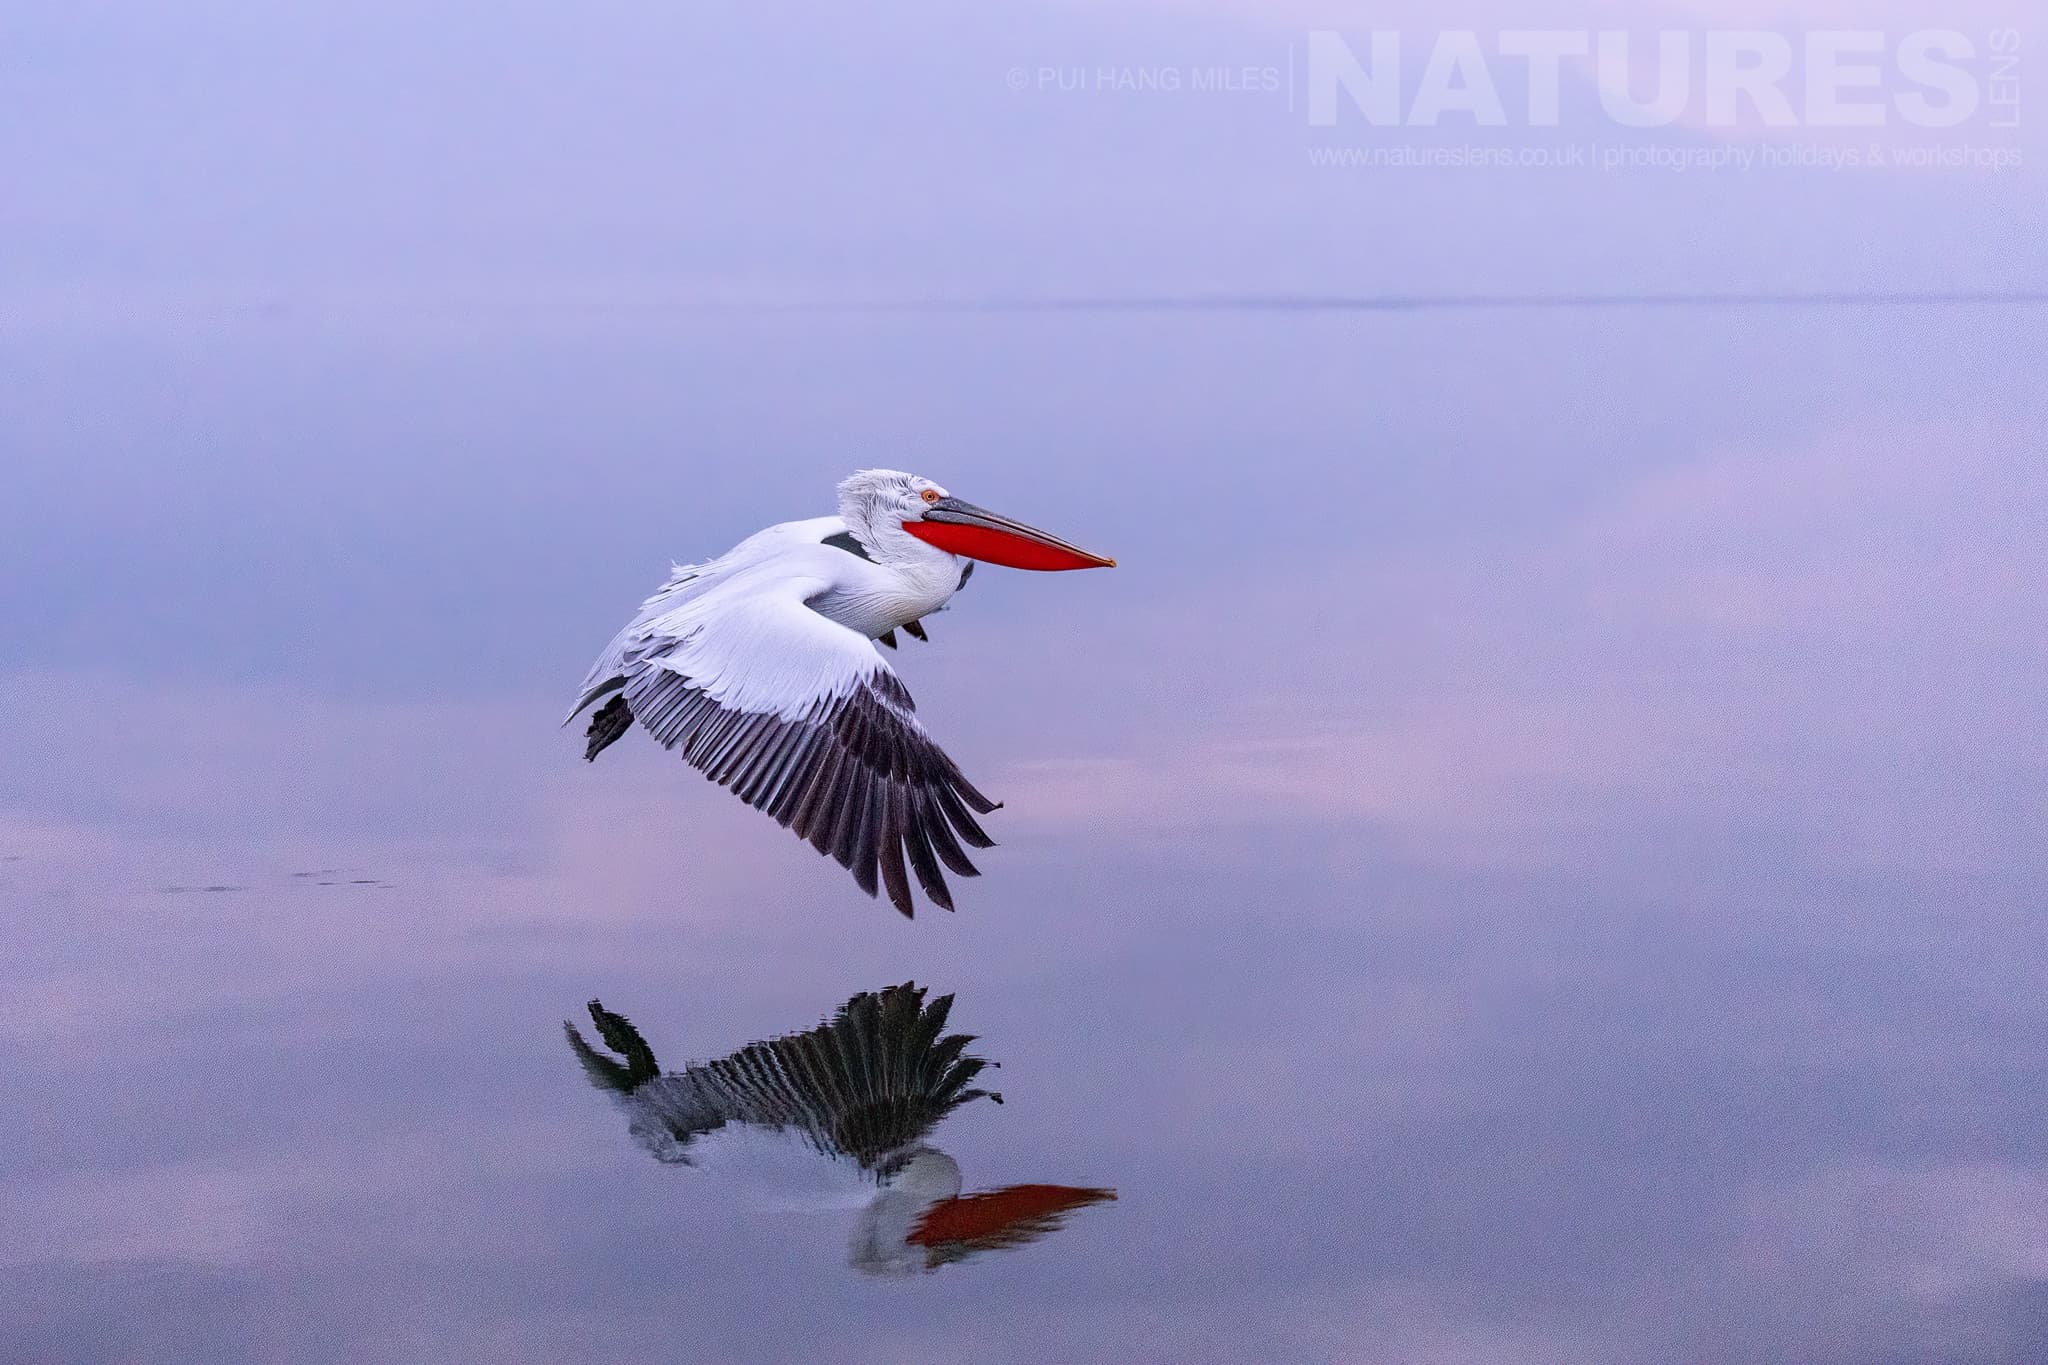 One Of The Pelicans Of Lake Kerkini Flying Over Still Waters Photographed During A Natureslens Pelicans Of Lake Kerkini Photography Holiday